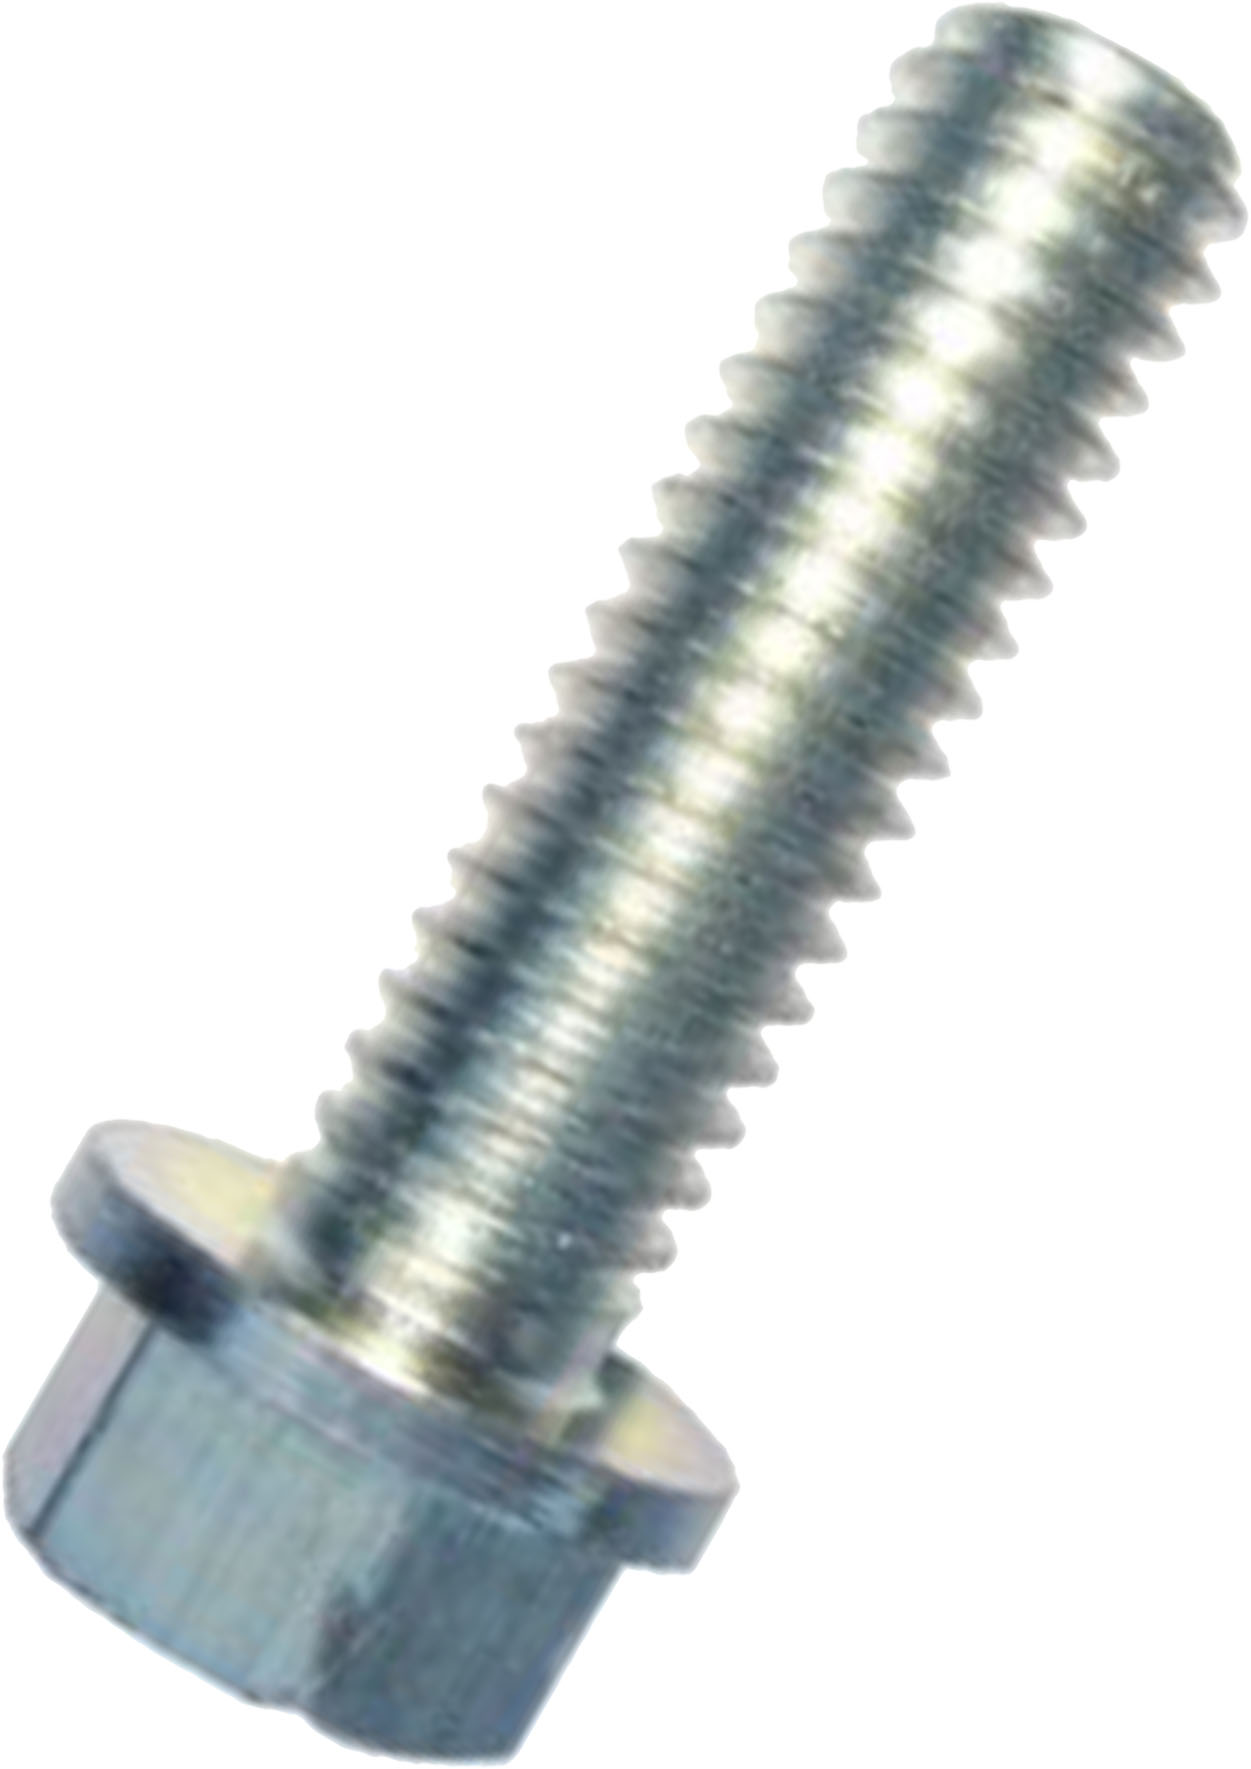 PARAFUSO 6X60 SEXT.ACO 5.8 MA RP CHV 8MM FLG 11MM ZN